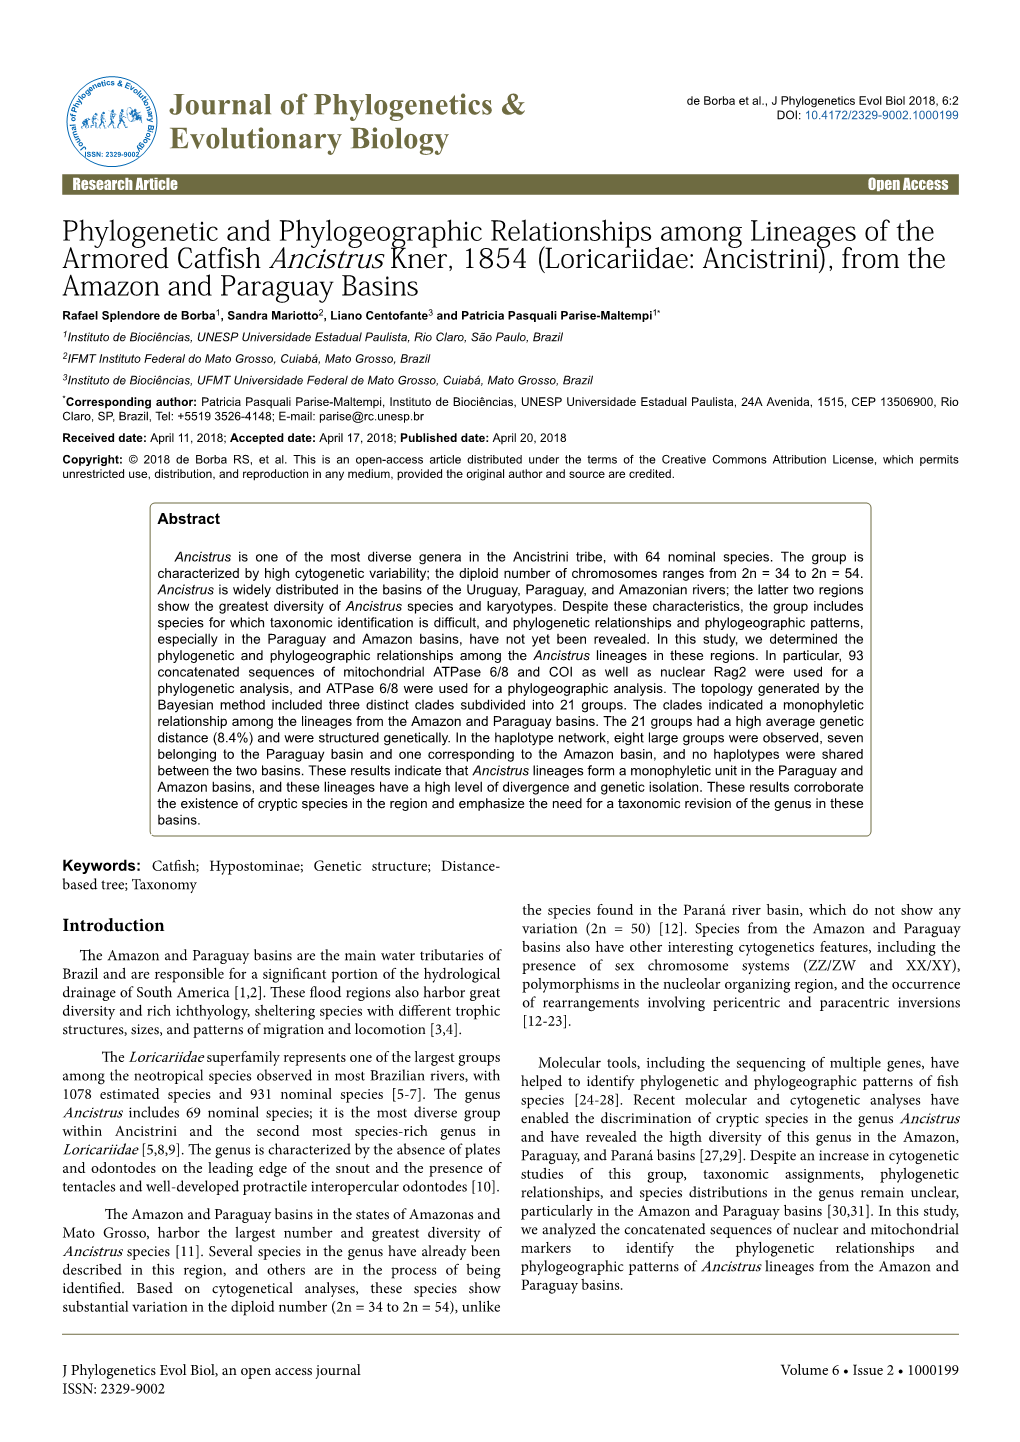 Phylogenetic and Phylogeographic Relationships Among Lineages of the Armored Catfish Ancistrus Kner, 1854 (Loricariidae: Ancistr